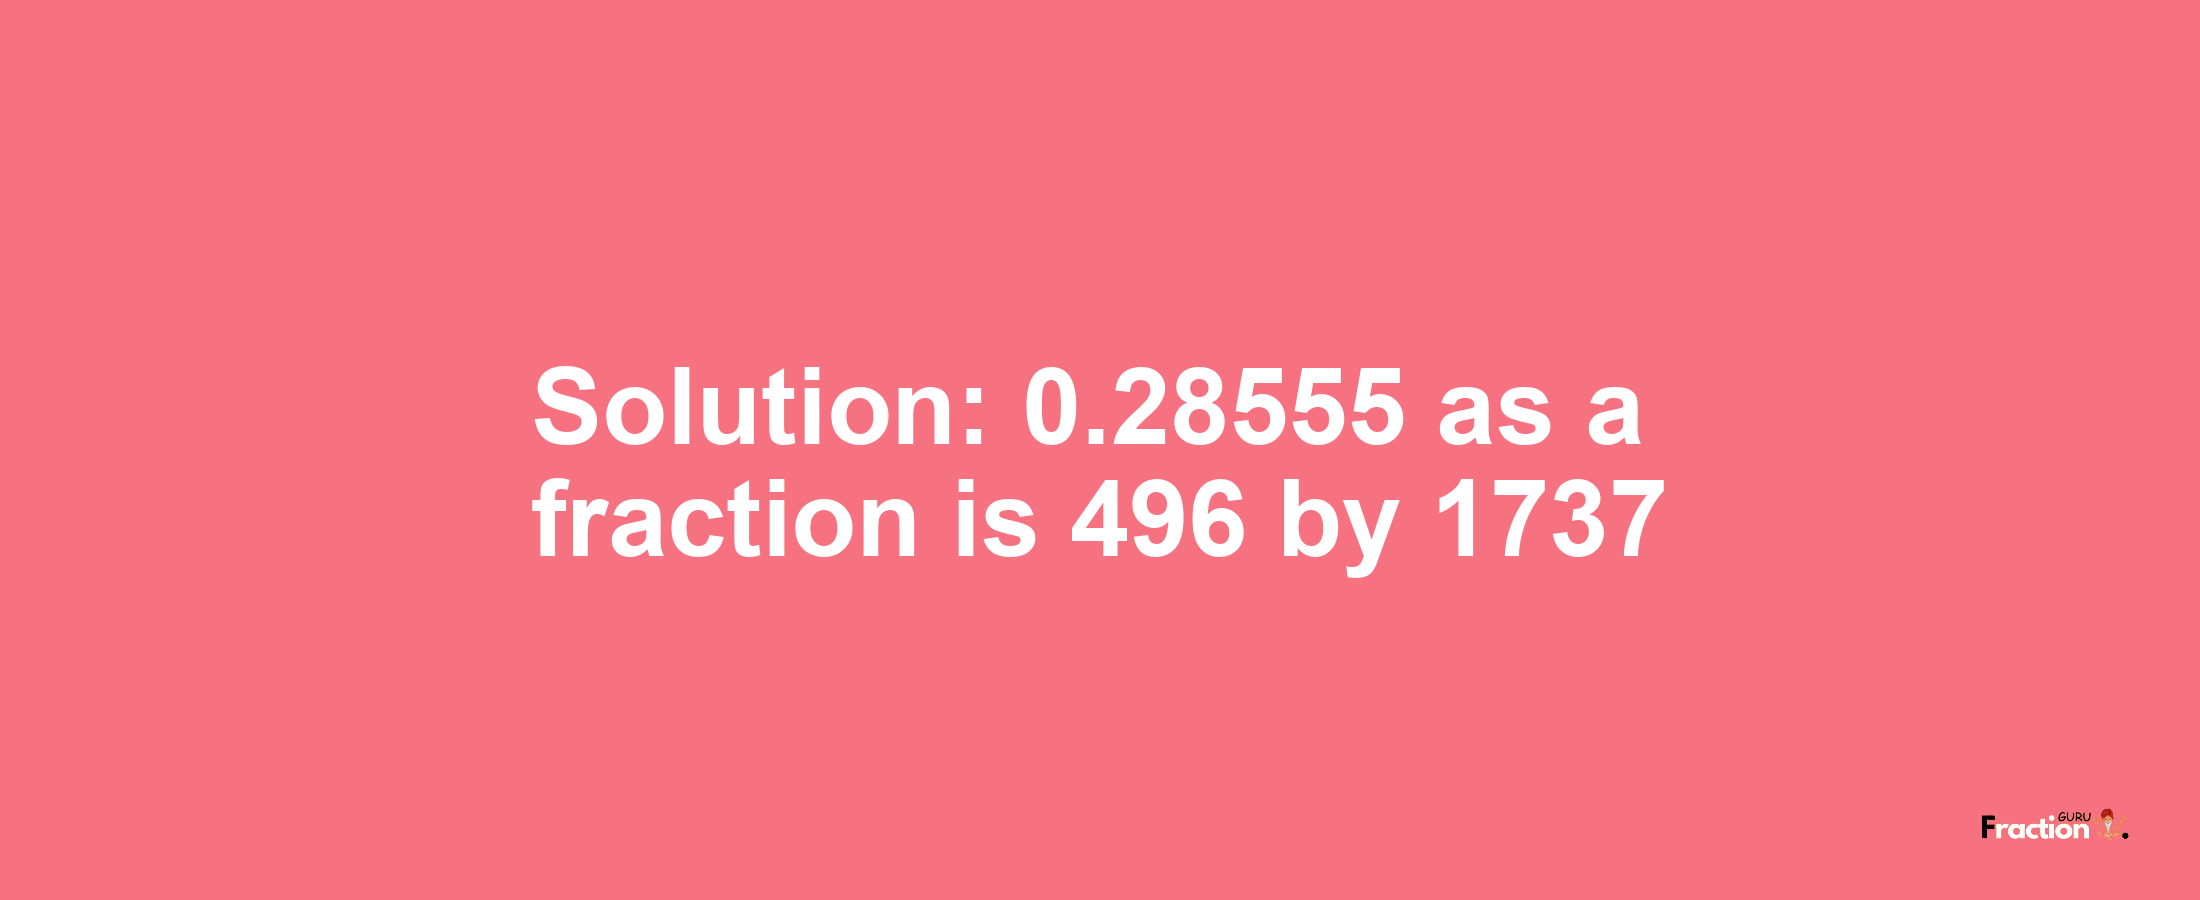 Solution:0.28555 as a fraction is 496/1737